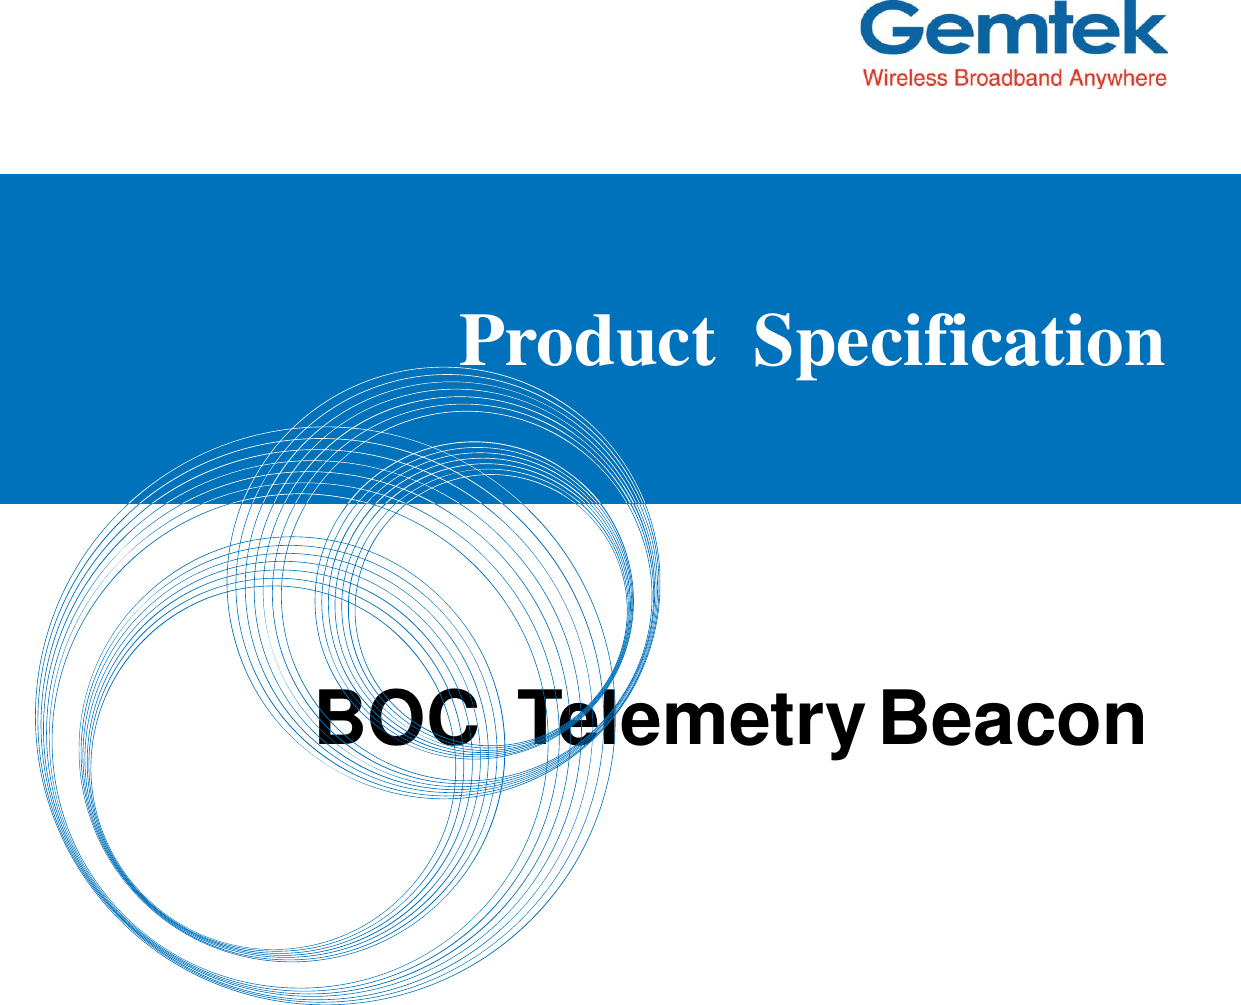                                                               Product  Specification         BOC  Telemetry Beacon     